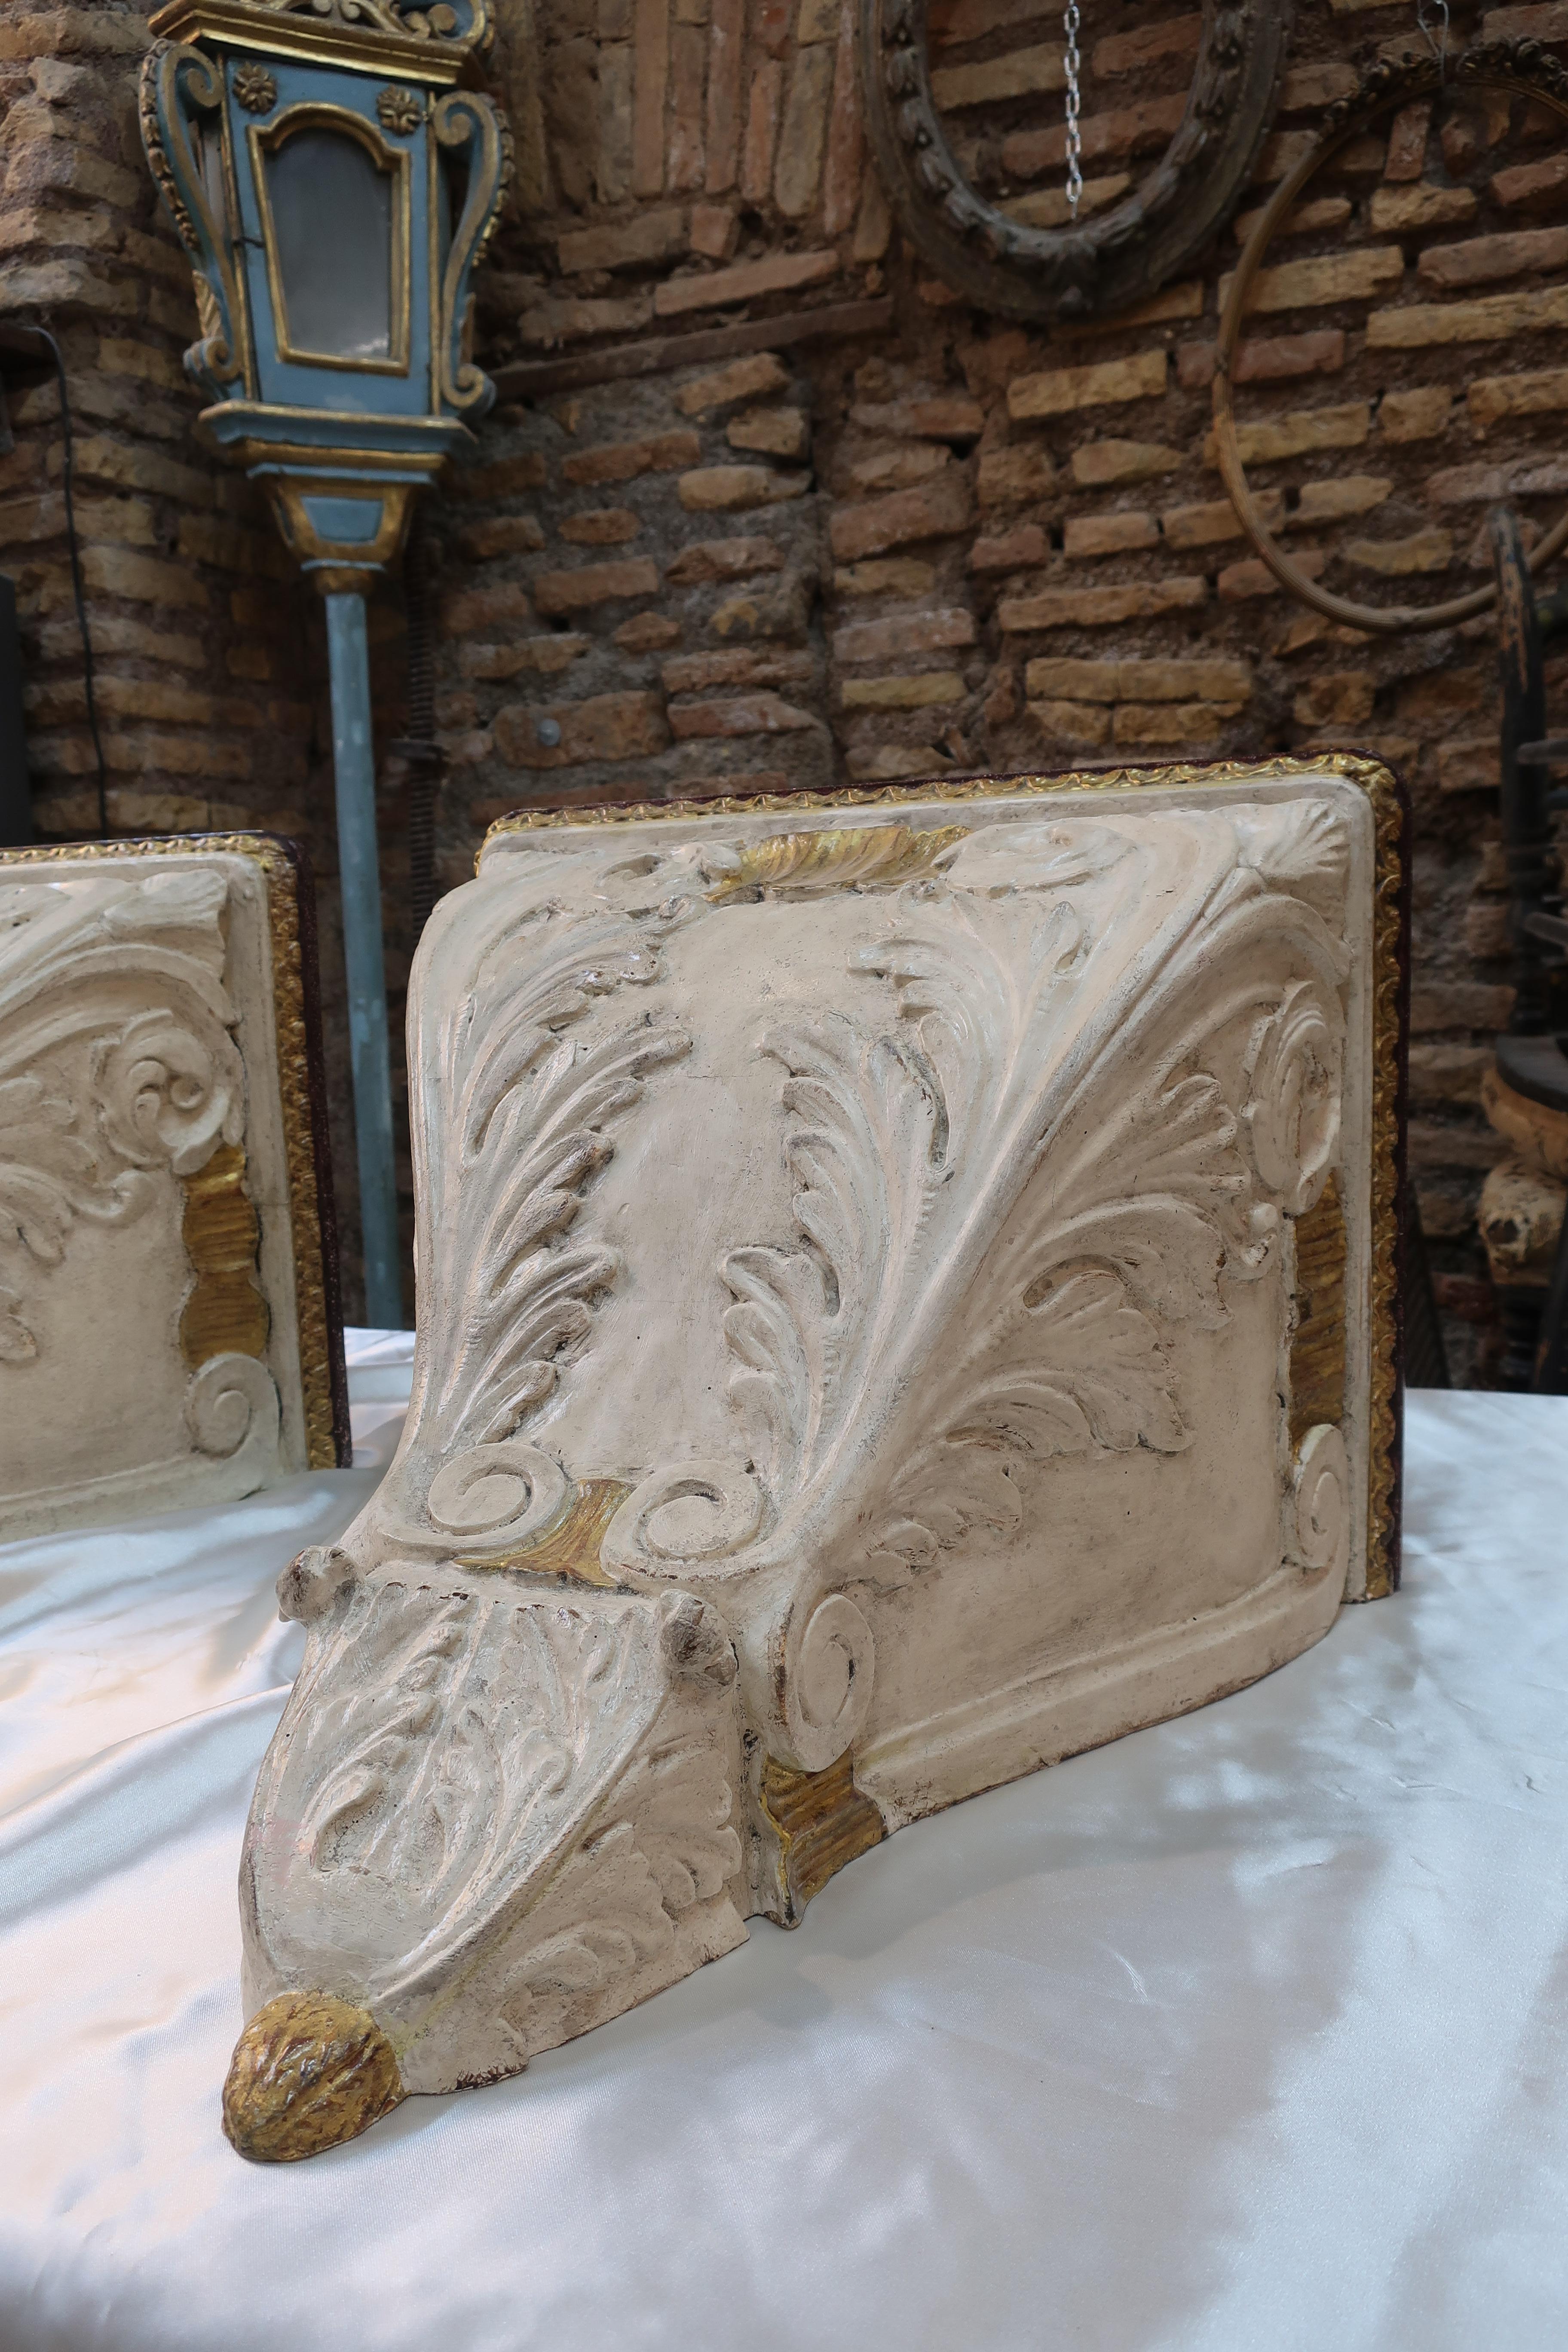 This pair of carved wooden shelves of the late 20th century is the work of Roman artisans from the past century.
They have been carved following the rich and lavish Baroque style, featuring intricate details of acanthus leaves and tapered shells,